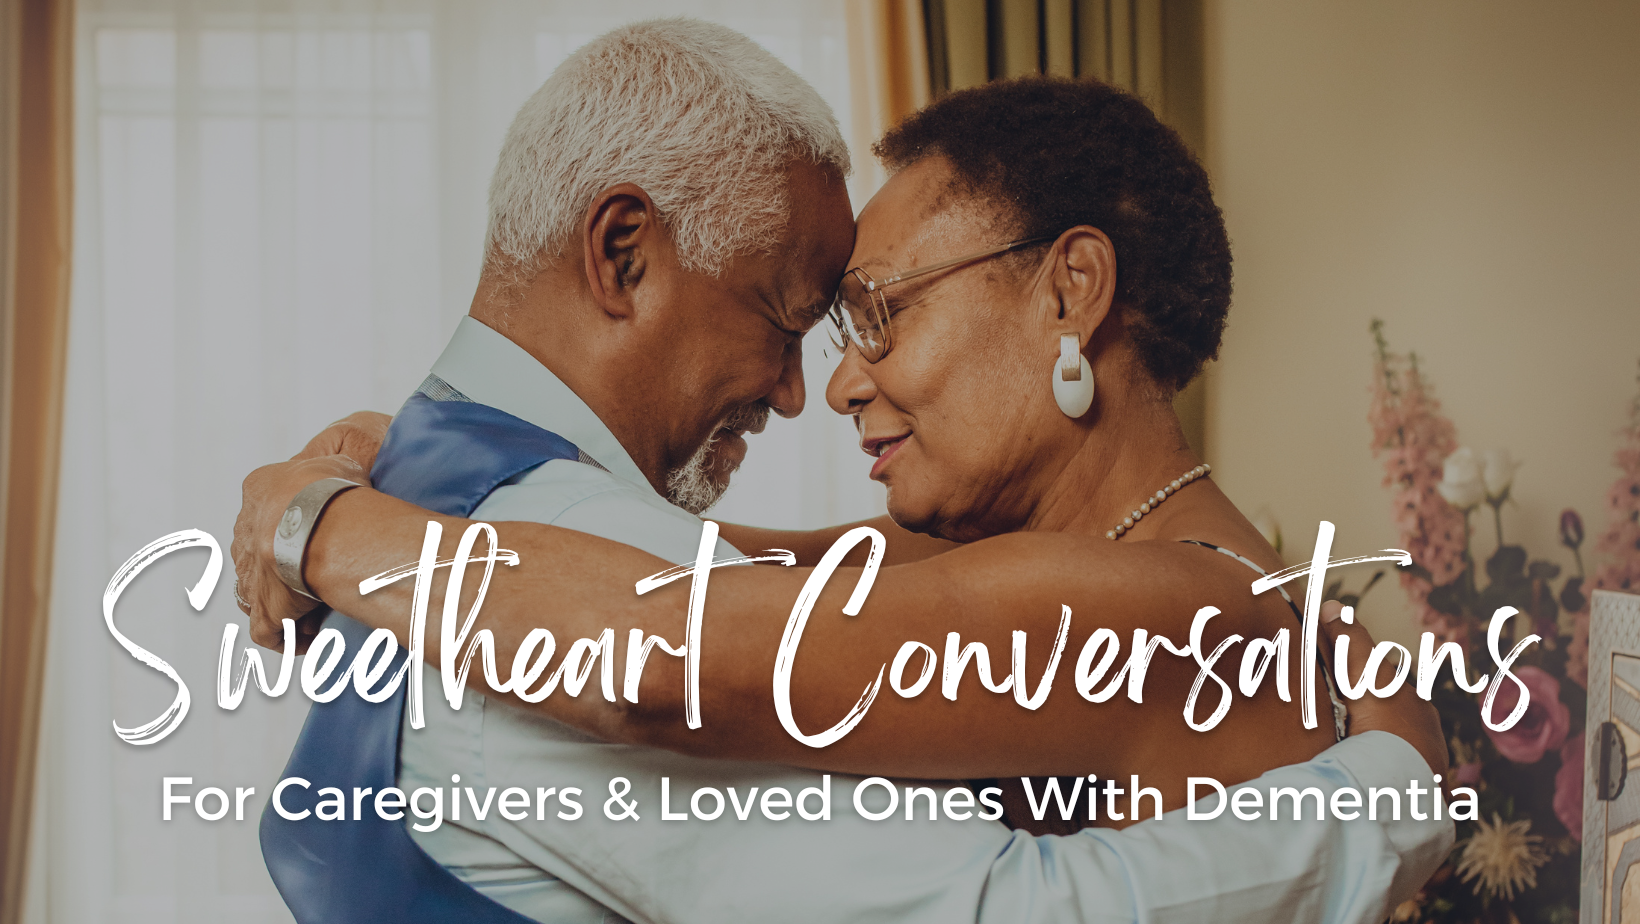 Valentine's Day sweetheart conversations starters for caregivers and loved ones with dementia